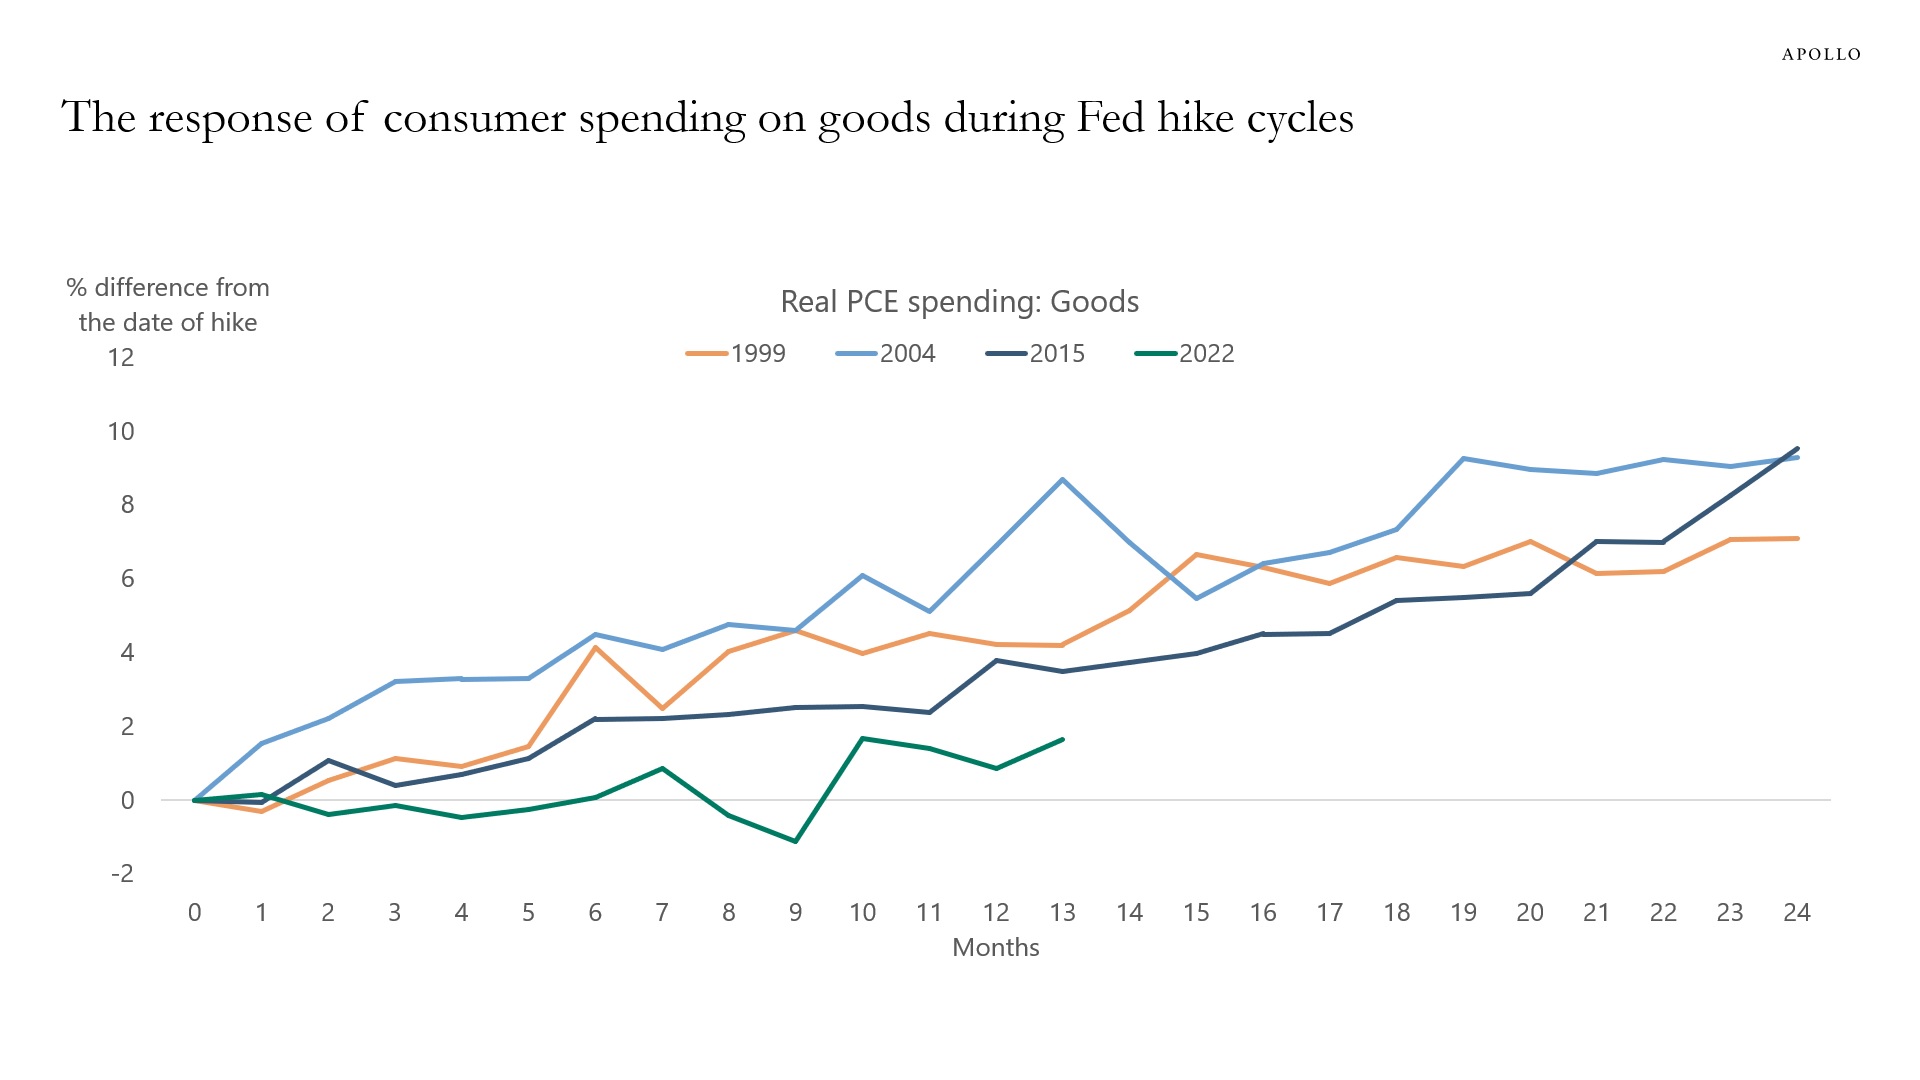 Response of goods spending during Fed rate hikes